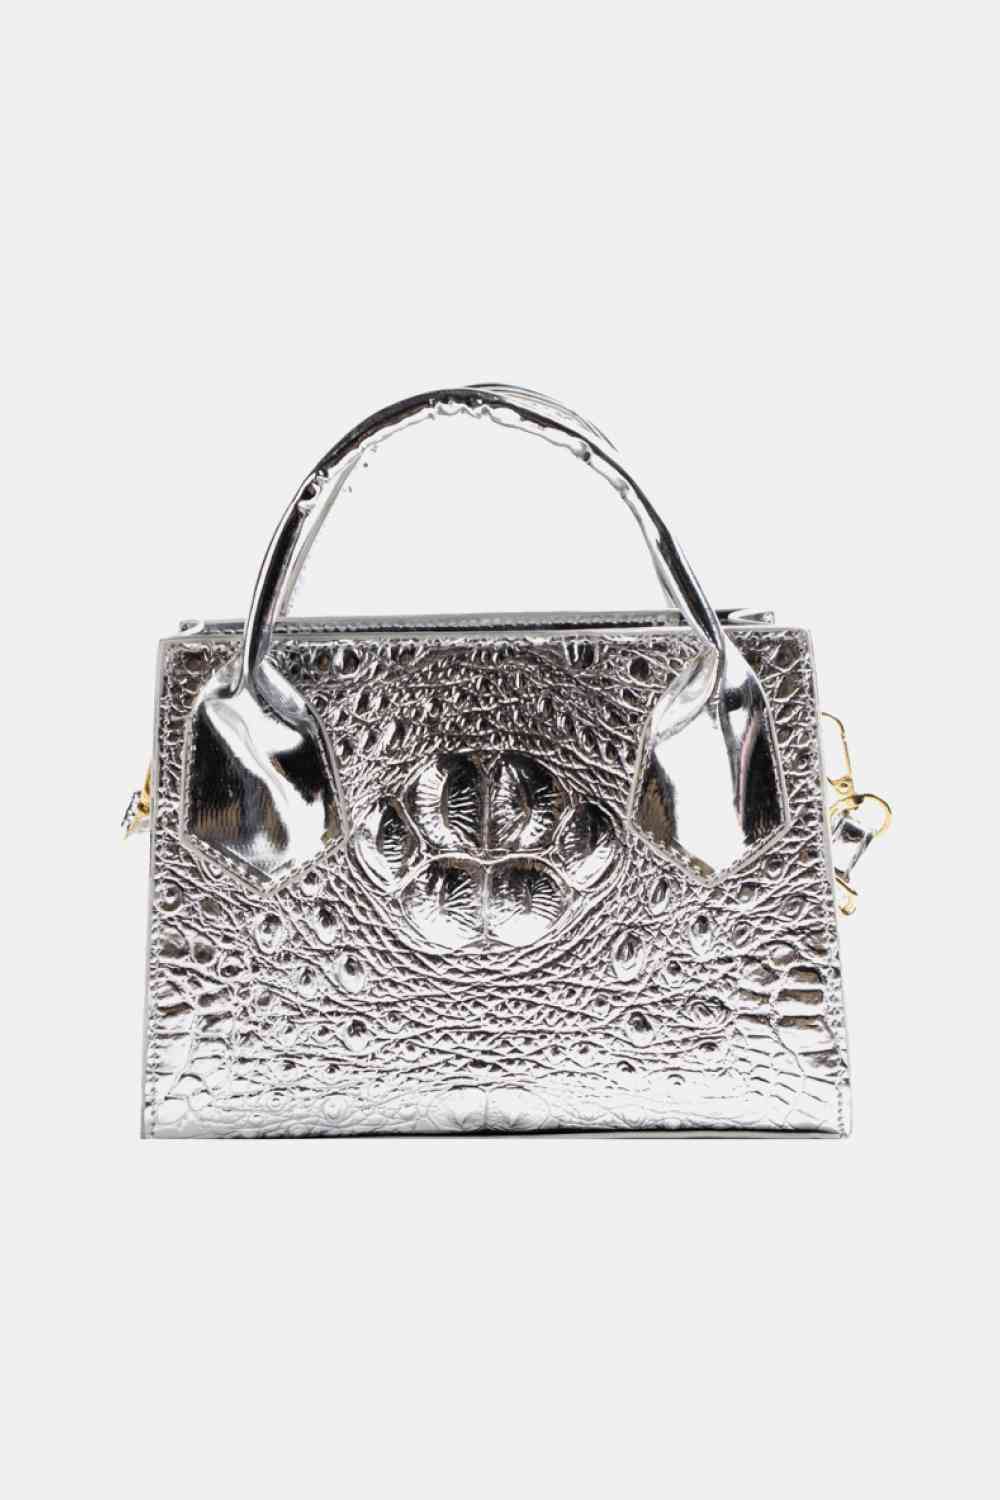 Textured PU Leather Crossbody Bag - Just Enuff Sexy